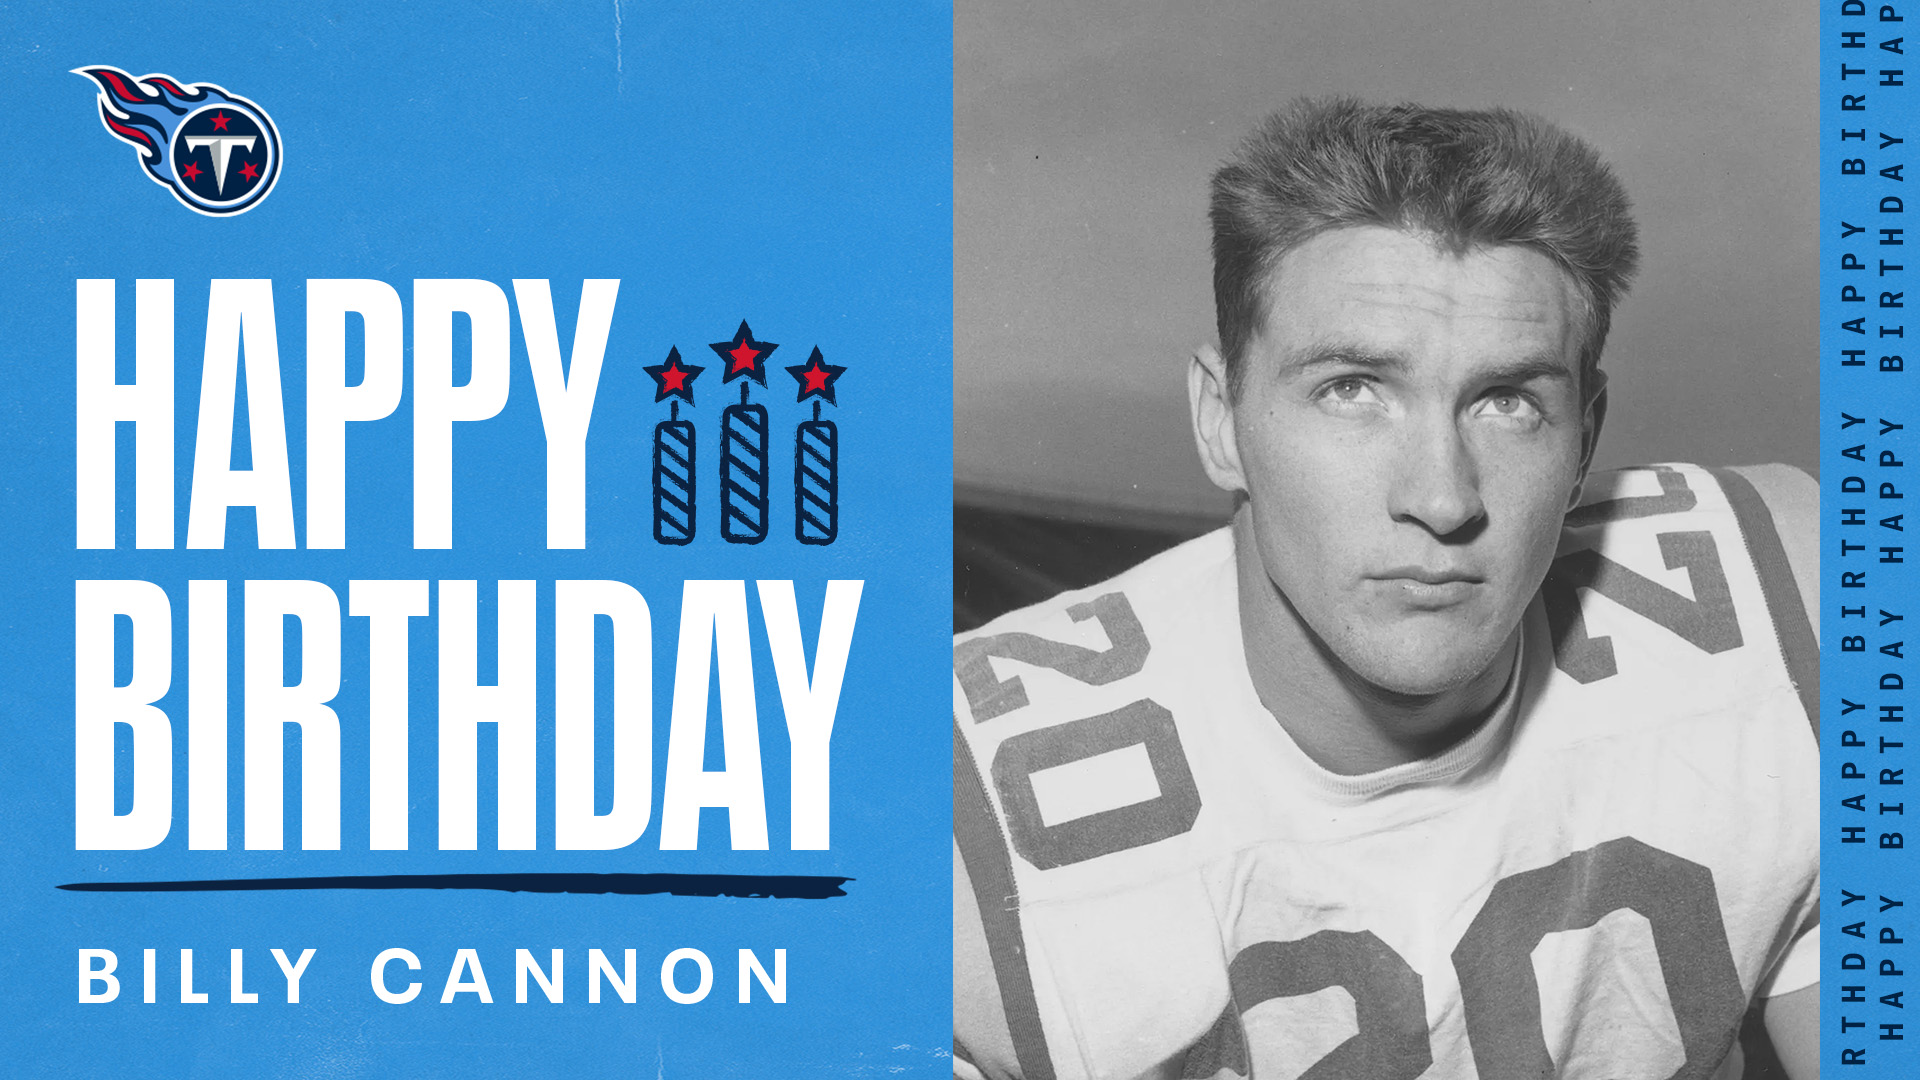 Happy Birthday to an Oilers legend, Billy Cannon! 